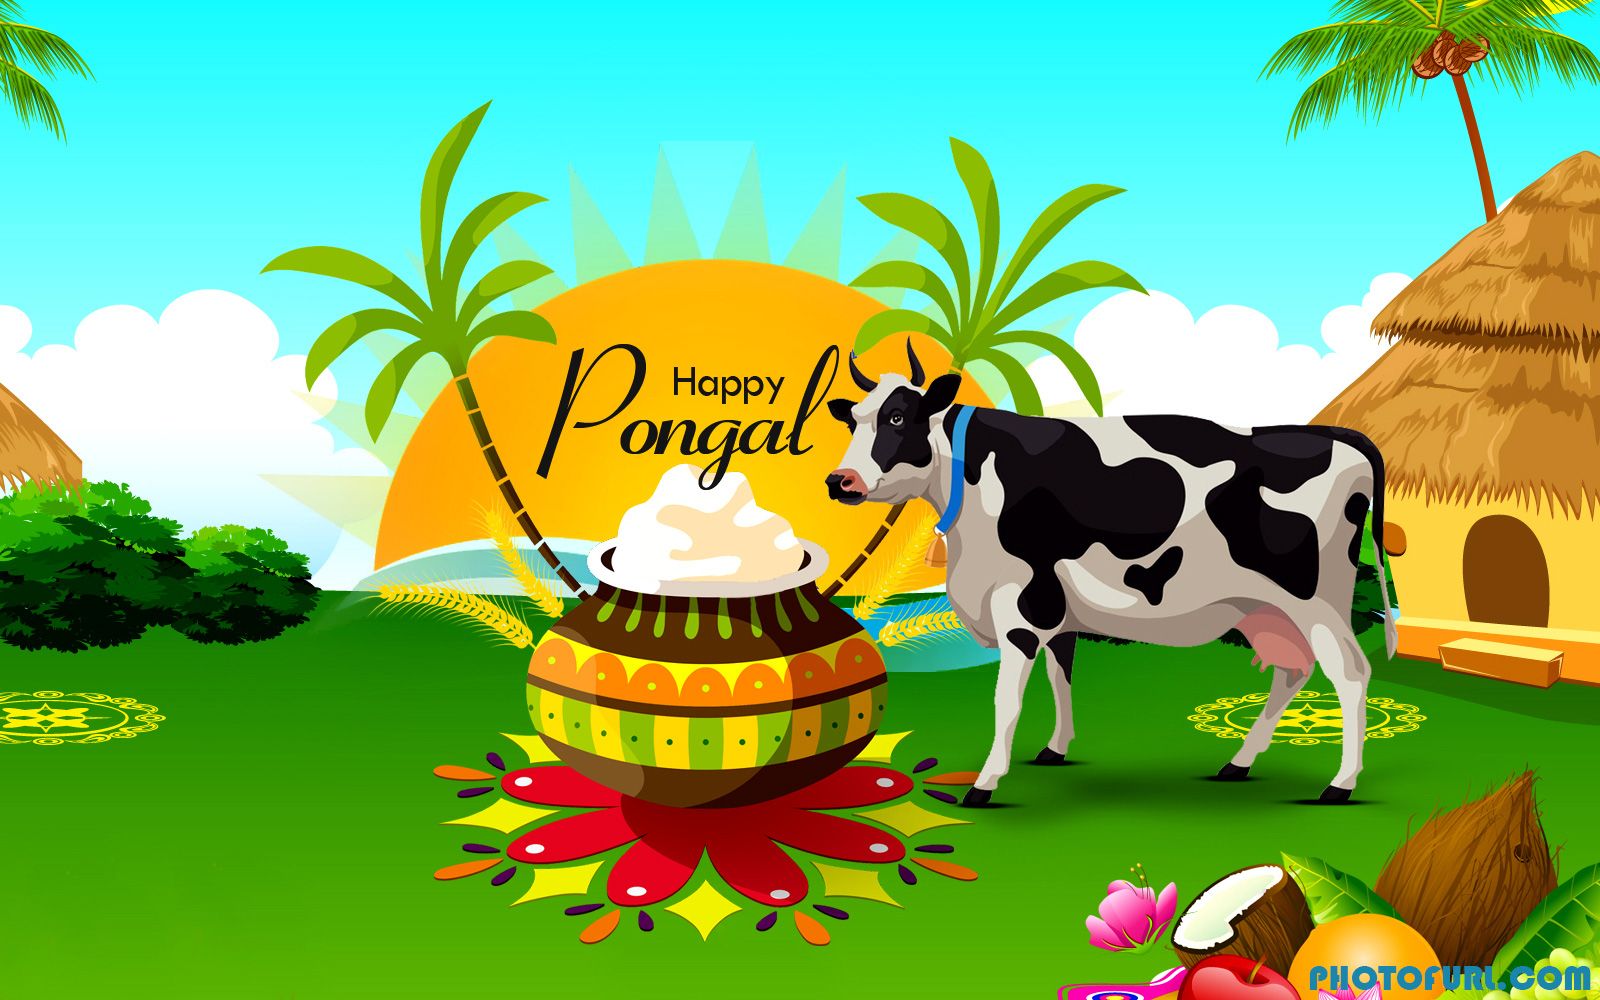 Happy 2019 Pongal Festival Image and Wallpaper for WhatsApp and Facebook